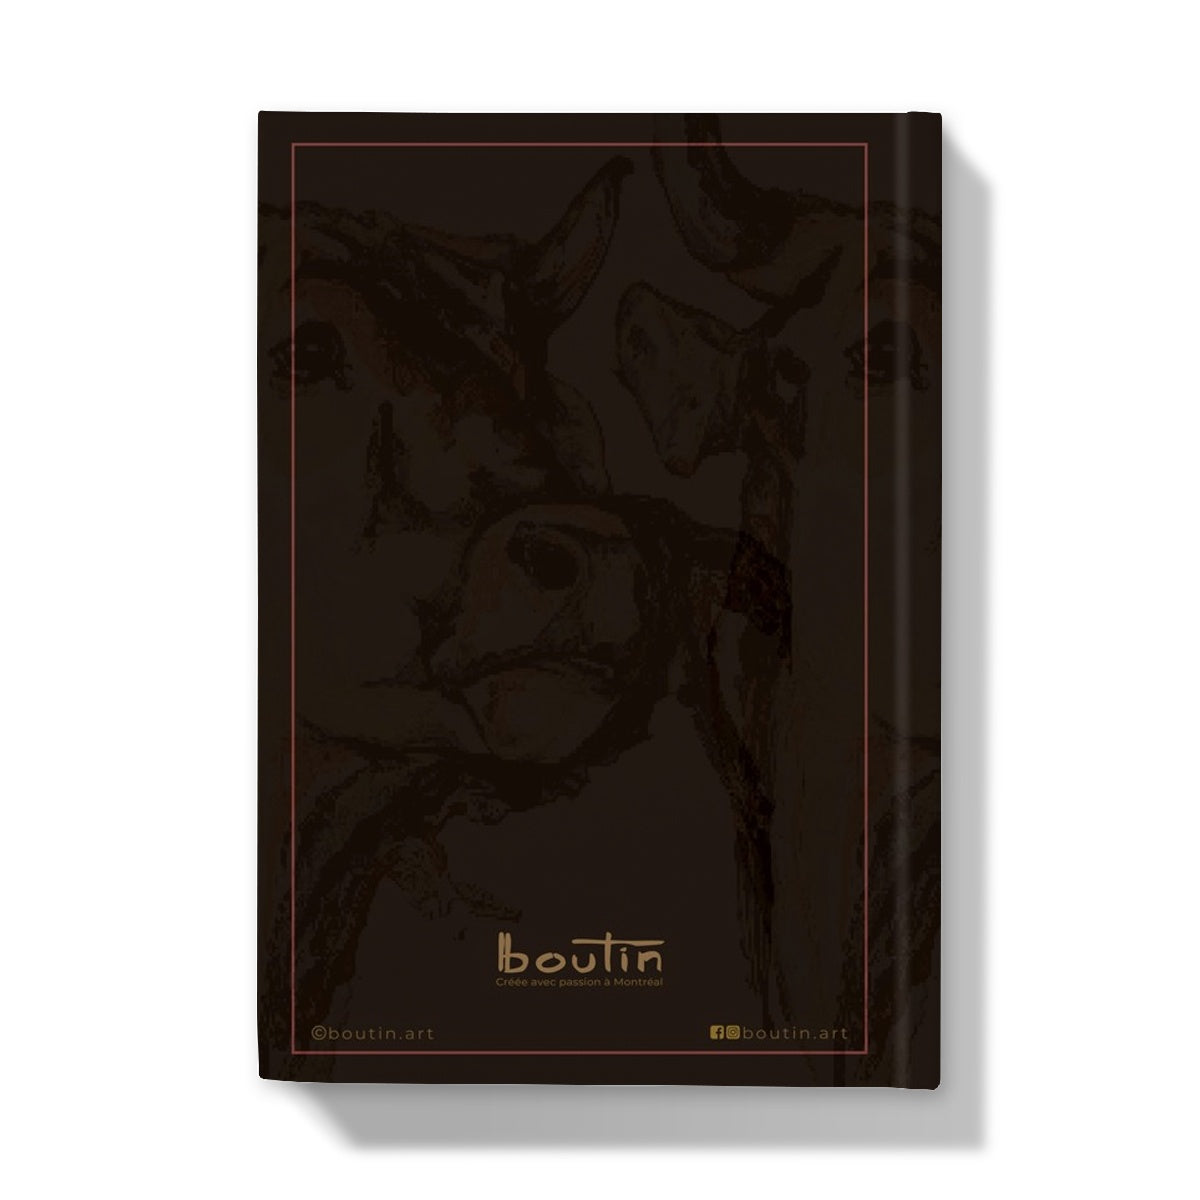 Brown Bob - Notebook by the artist Boutin